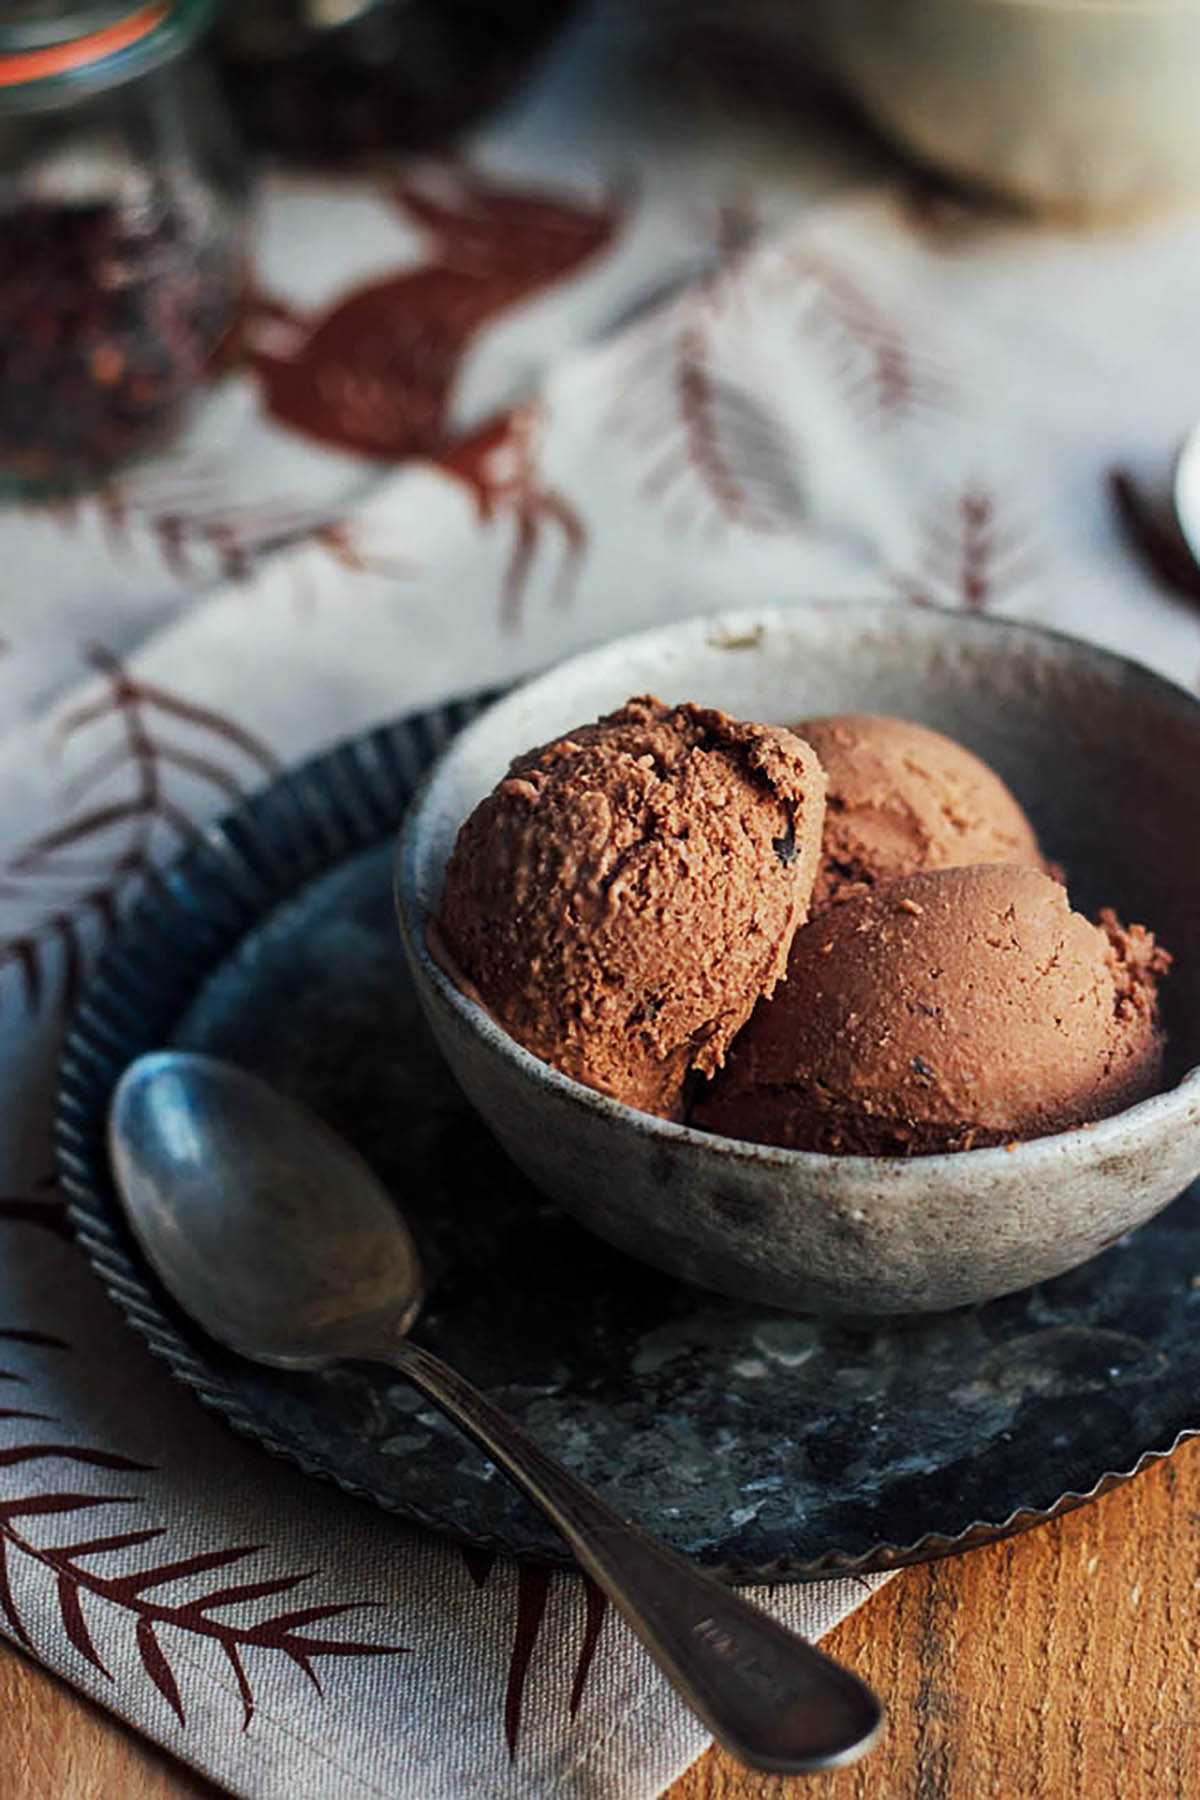 Three scoops of chocolate ice cream in a small bowl.